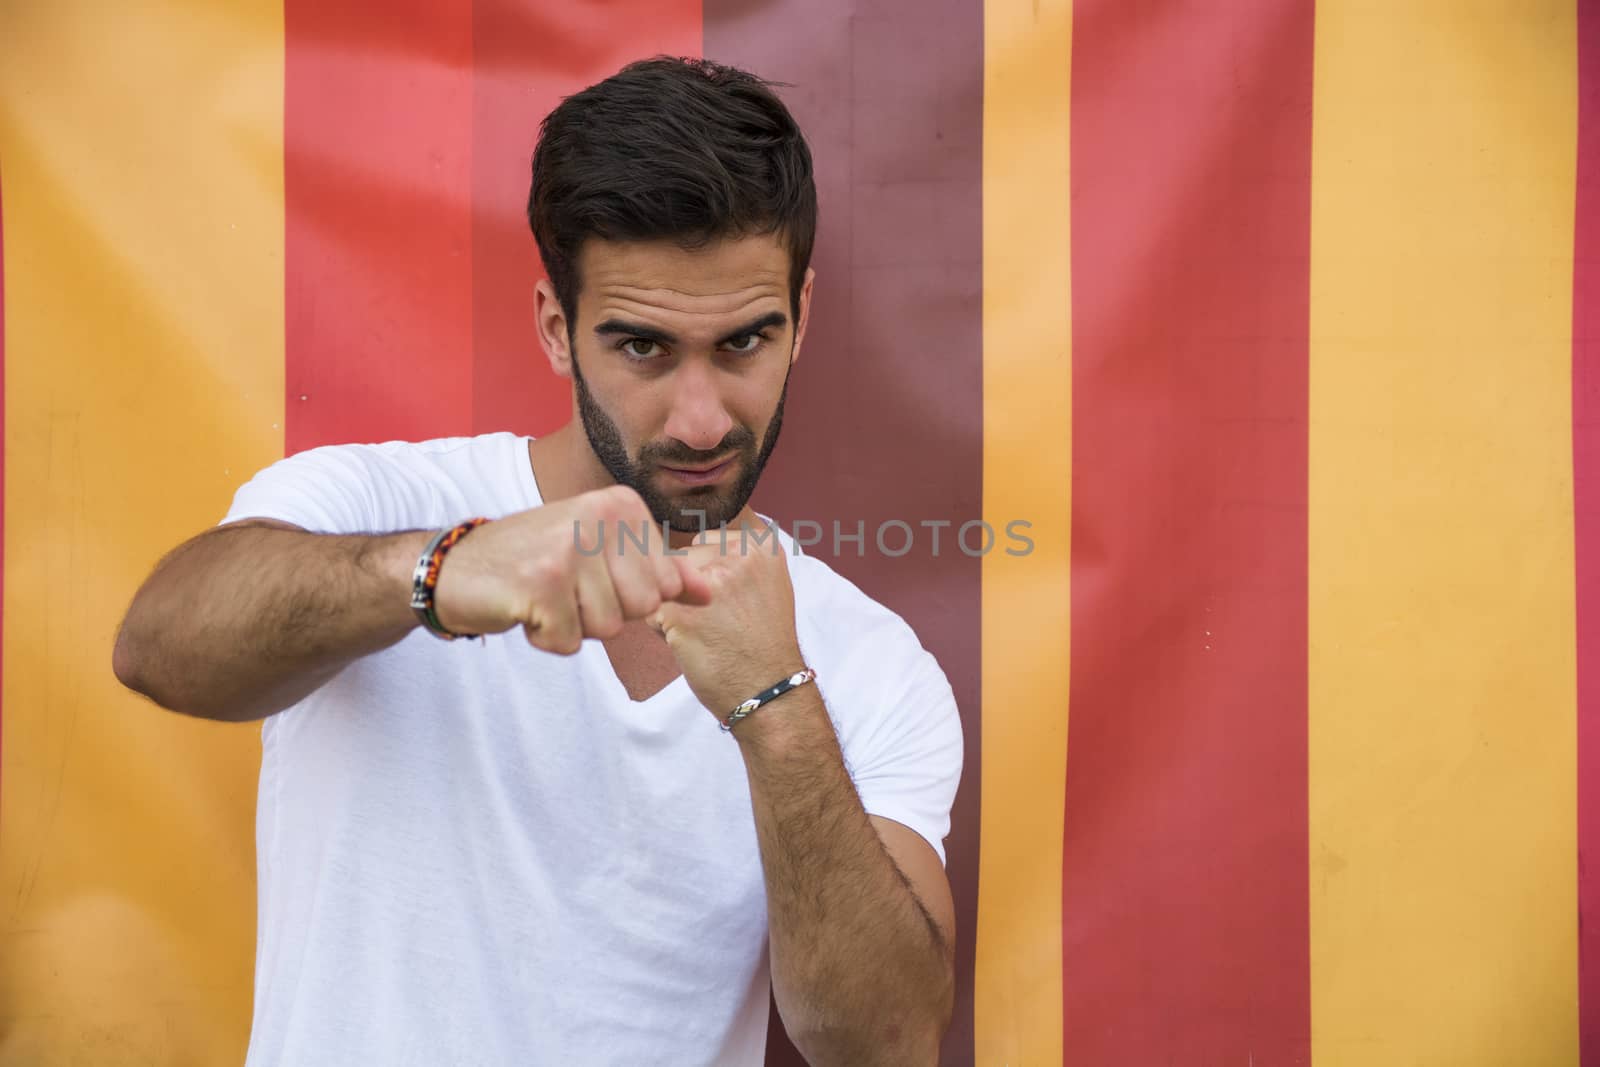 Angry handsome young man throwing punch to camera on colorful background